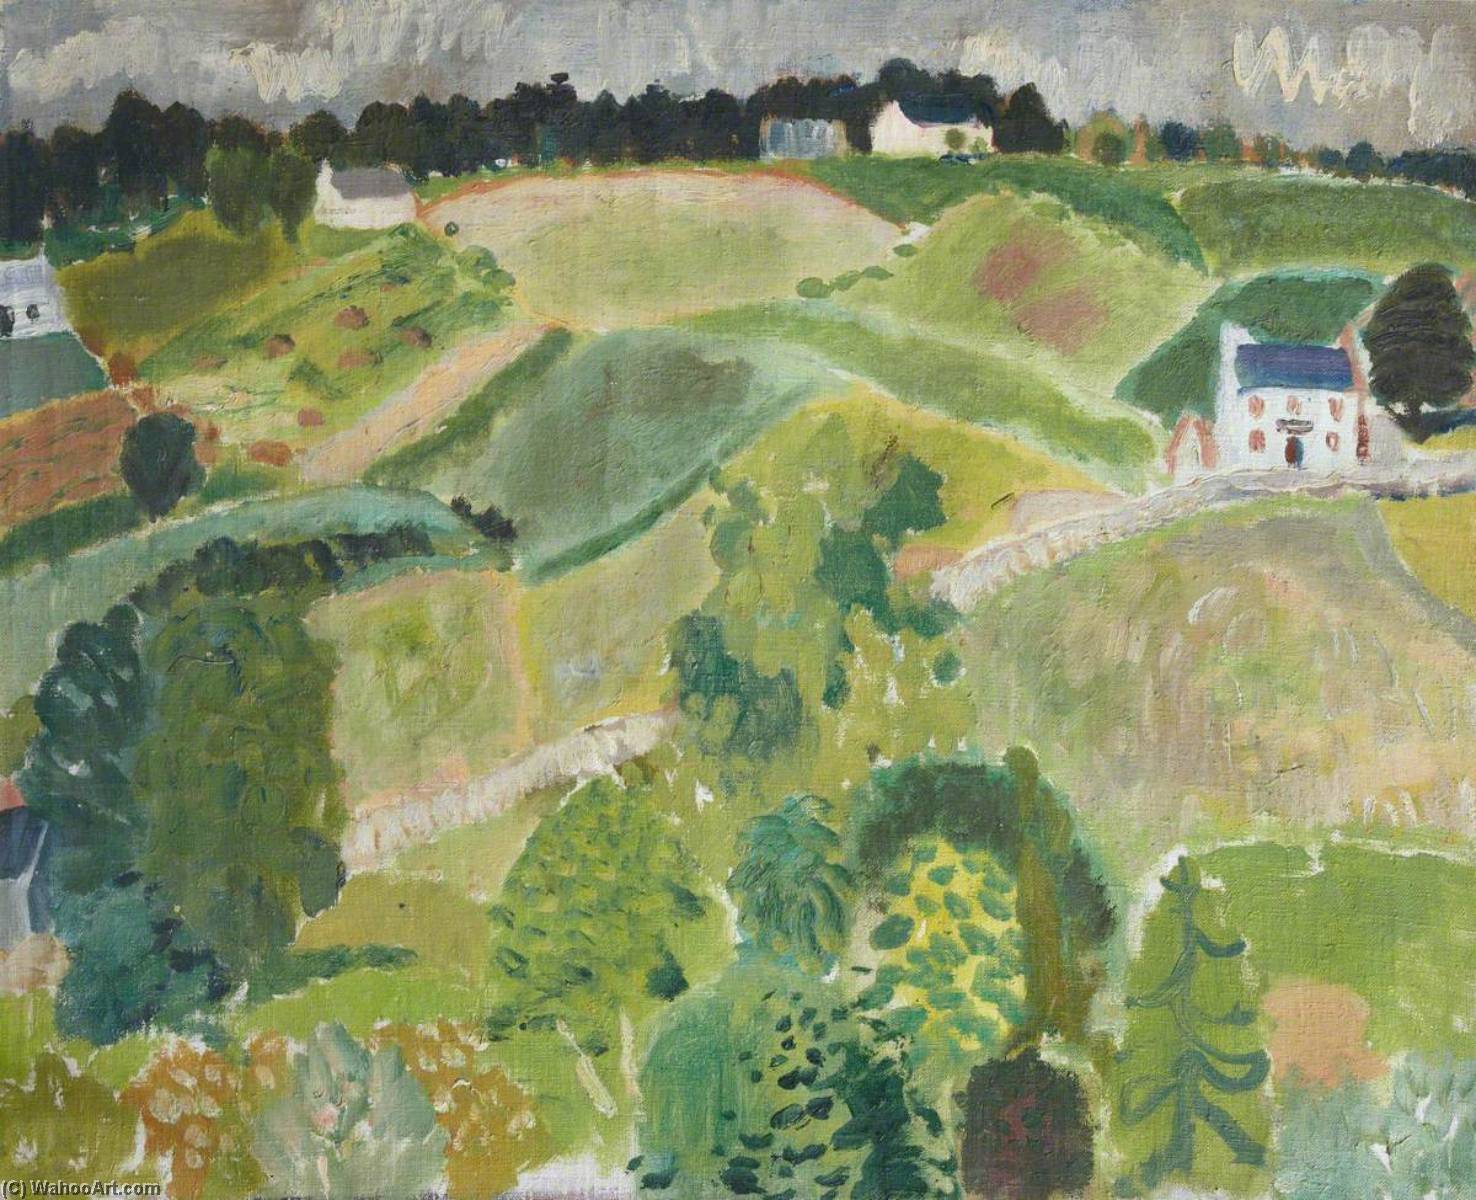 Landscape with Cottages, Fields and Mixed Trees by William George Gillies William George Gillies | ArtsDot.com